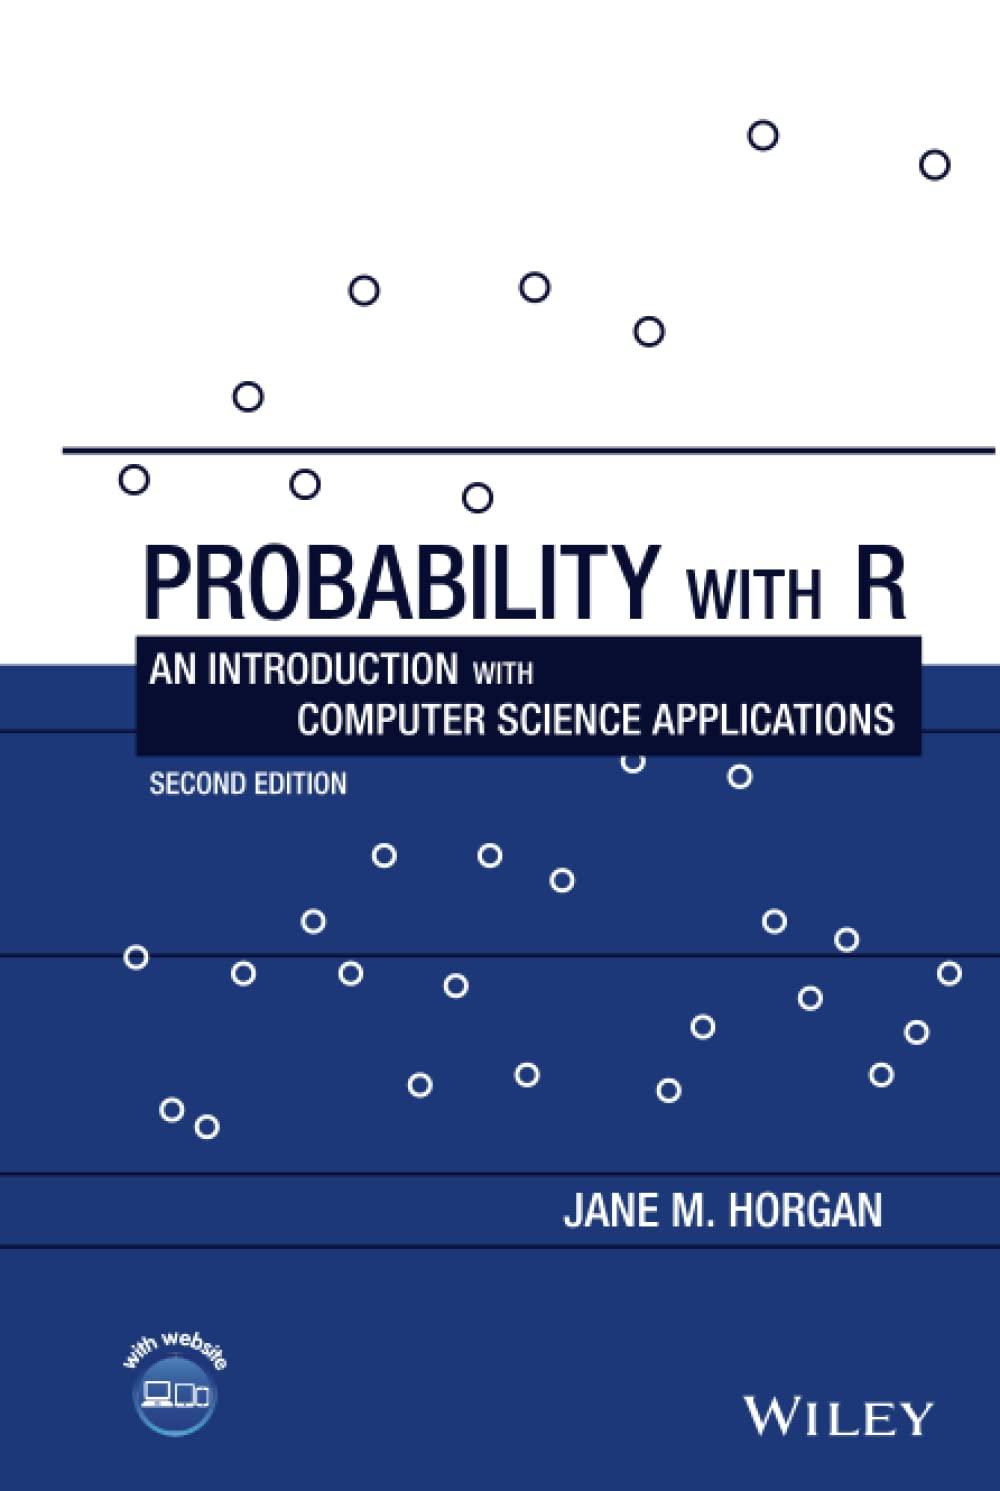 probability with r an introduction with computer science applications 2nd edition jane m. horgan 1119536944,